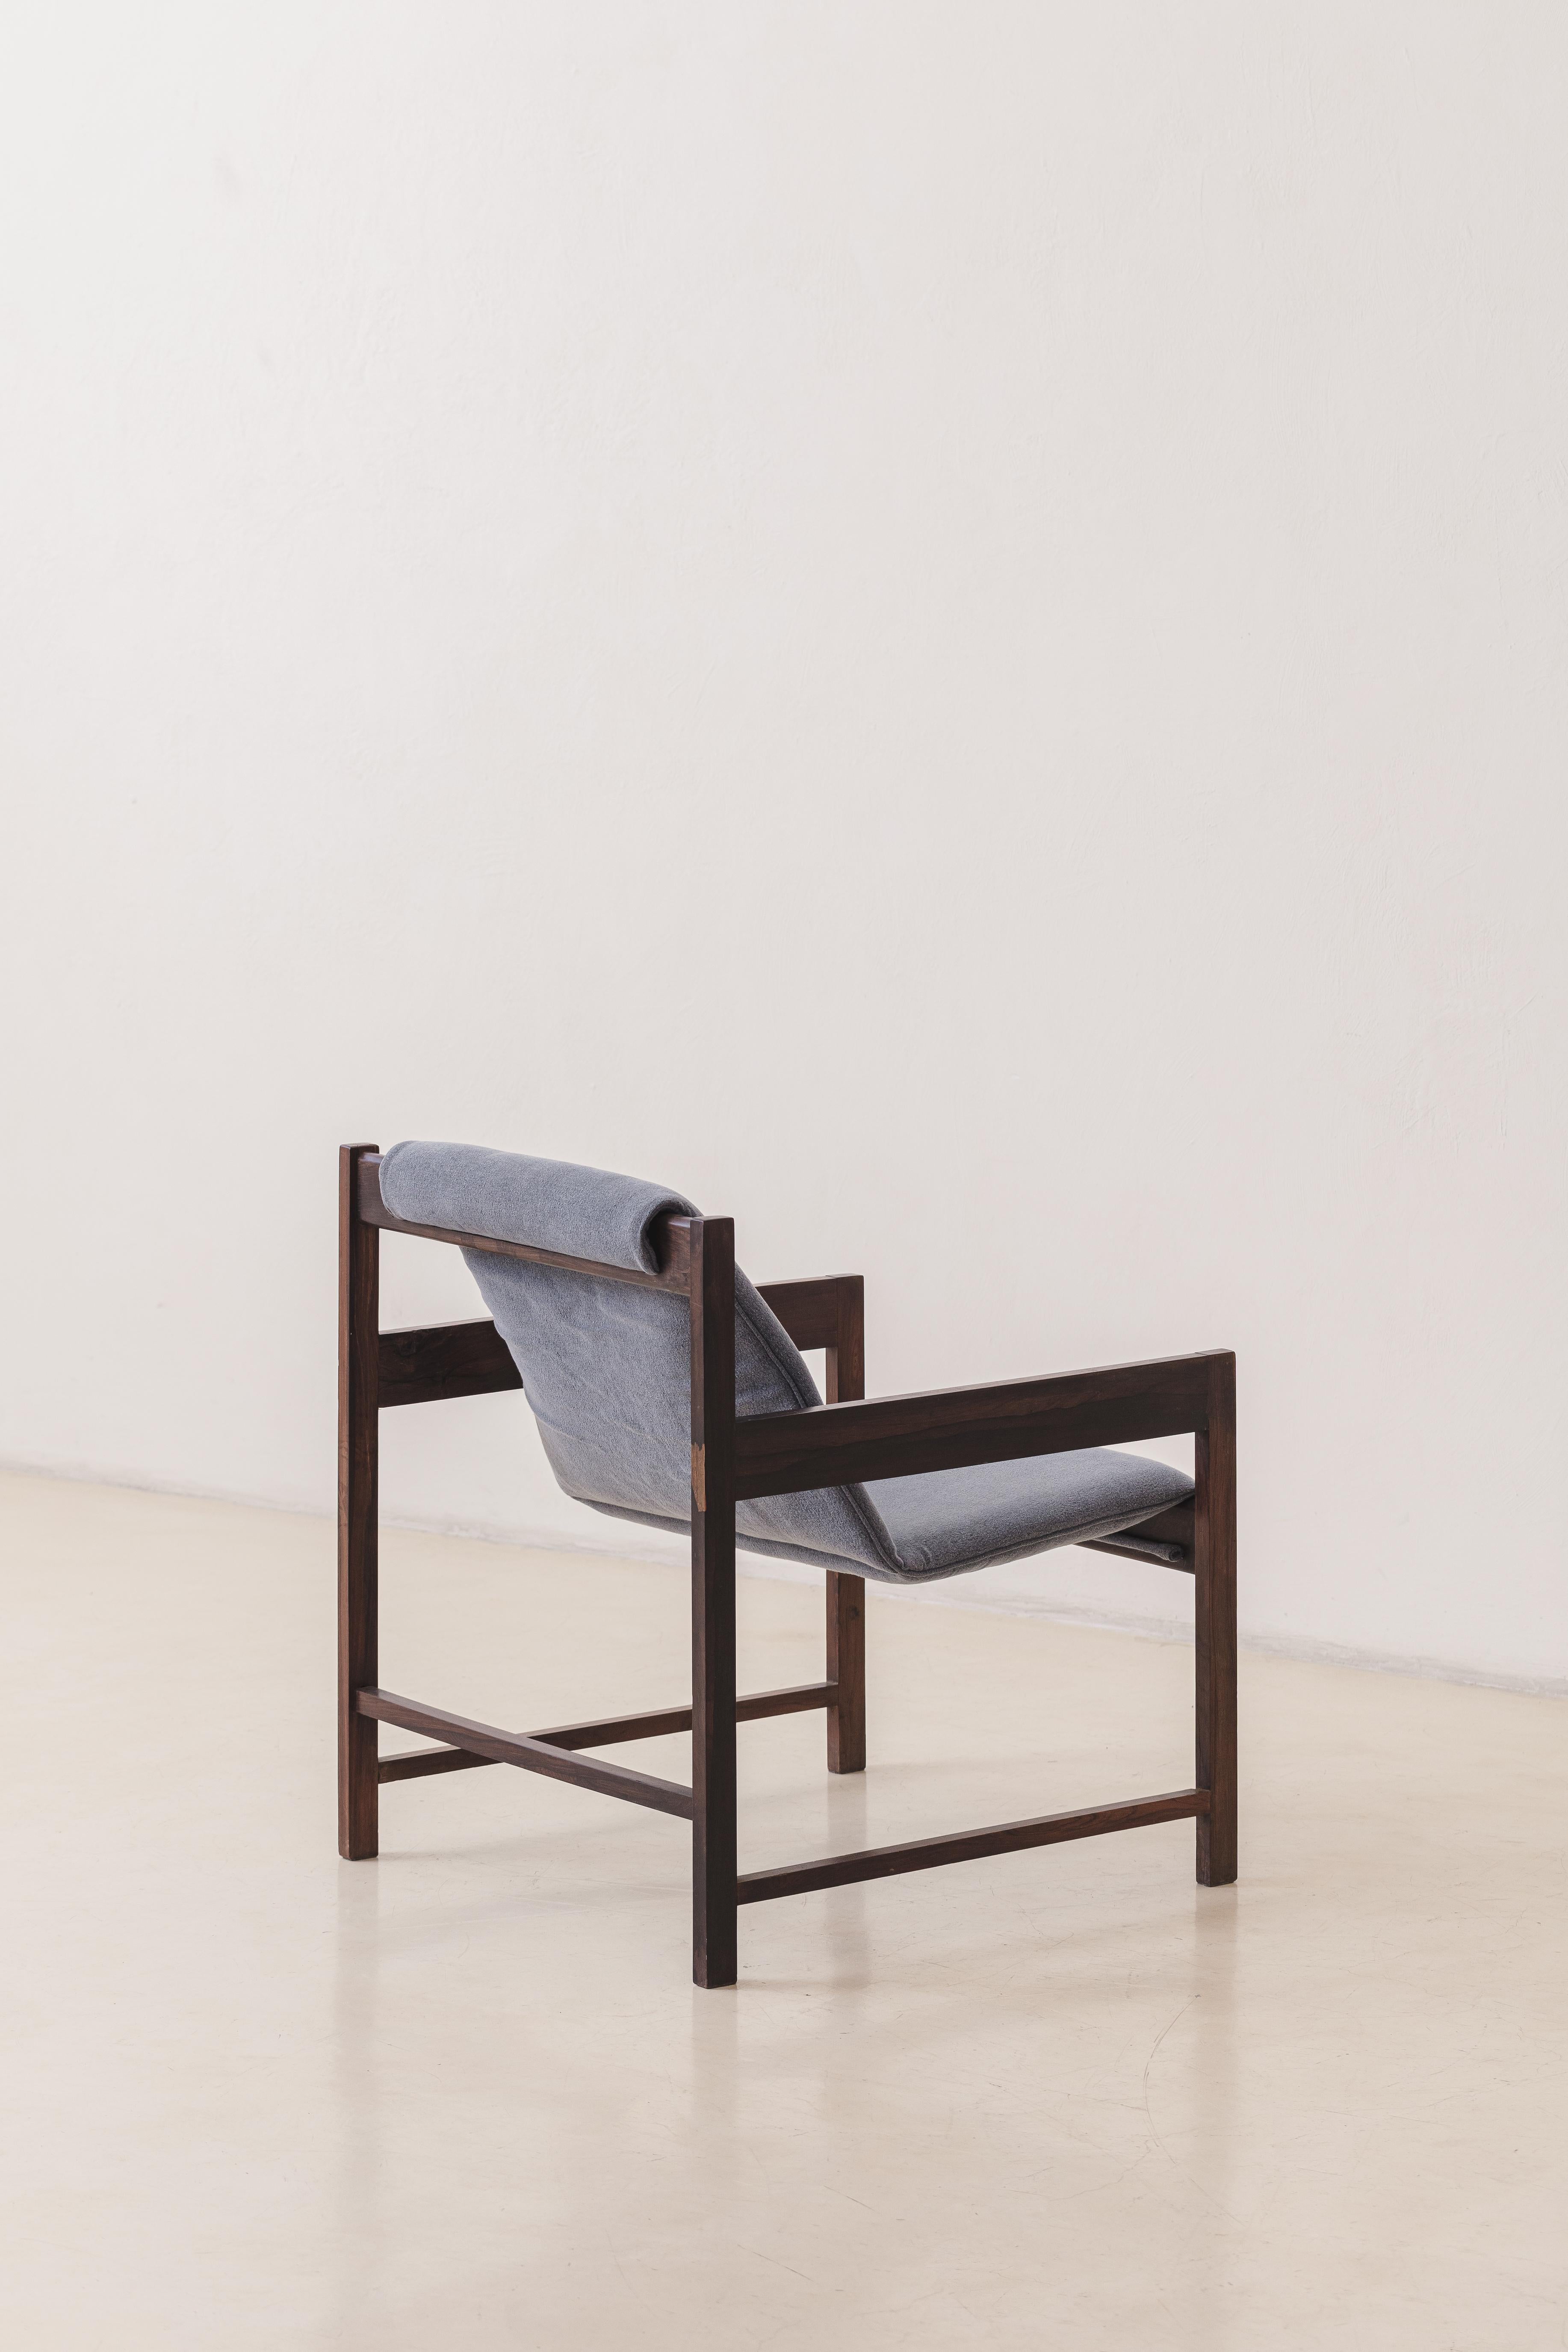 Mid-20th Century Lia Armchair Design by Sergio Rodrigues, Rosewood, Mid-Century Modern, Oca 1960s For Sale